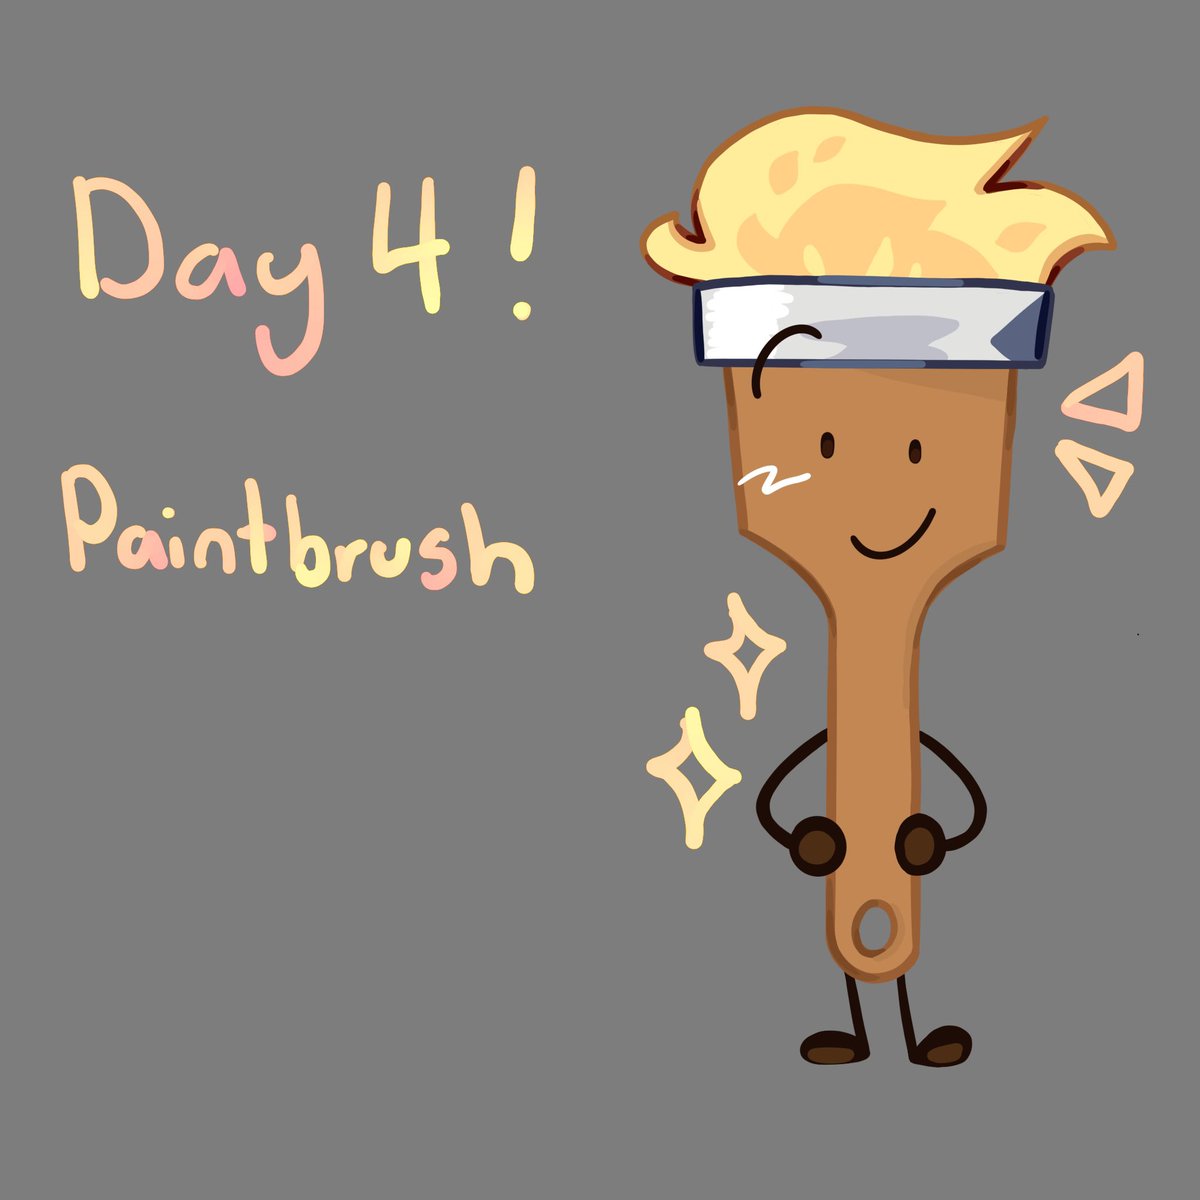 Day 4 - Paintbrush!!!

Drawing my favorite character from different object shows till the Bfdi x II meetup (But I started very late💀)

I LOVE PAINTBRUSH AHHHHH SO MUCH HELP I was almost late it’s fine there is like 5 min left HELP #inanimateinsanity #inanimateinsanityfanart #osc